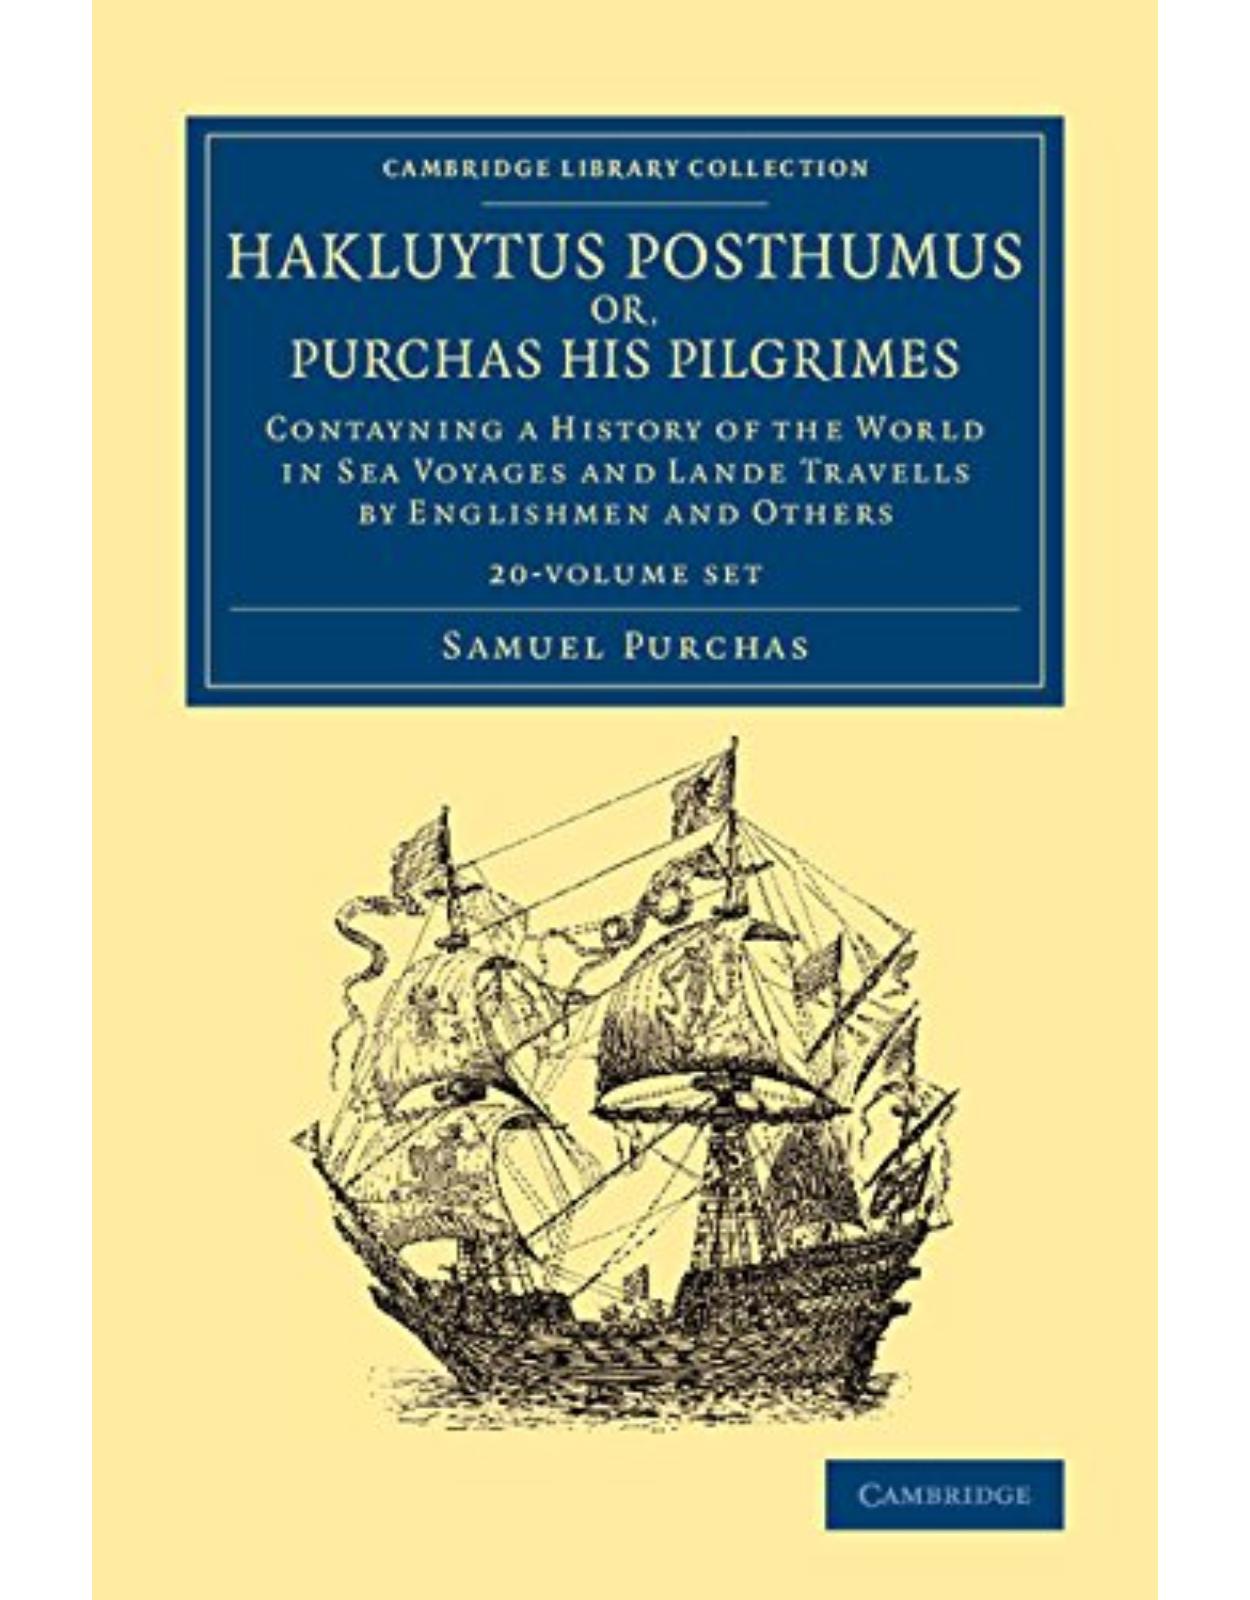 Hakluytus Posthumus or, Purchas his Pilgrimes 20 Volume Set: Contayning a History of the World in Sea Voyages and Lande Travells by Englishmen and Others